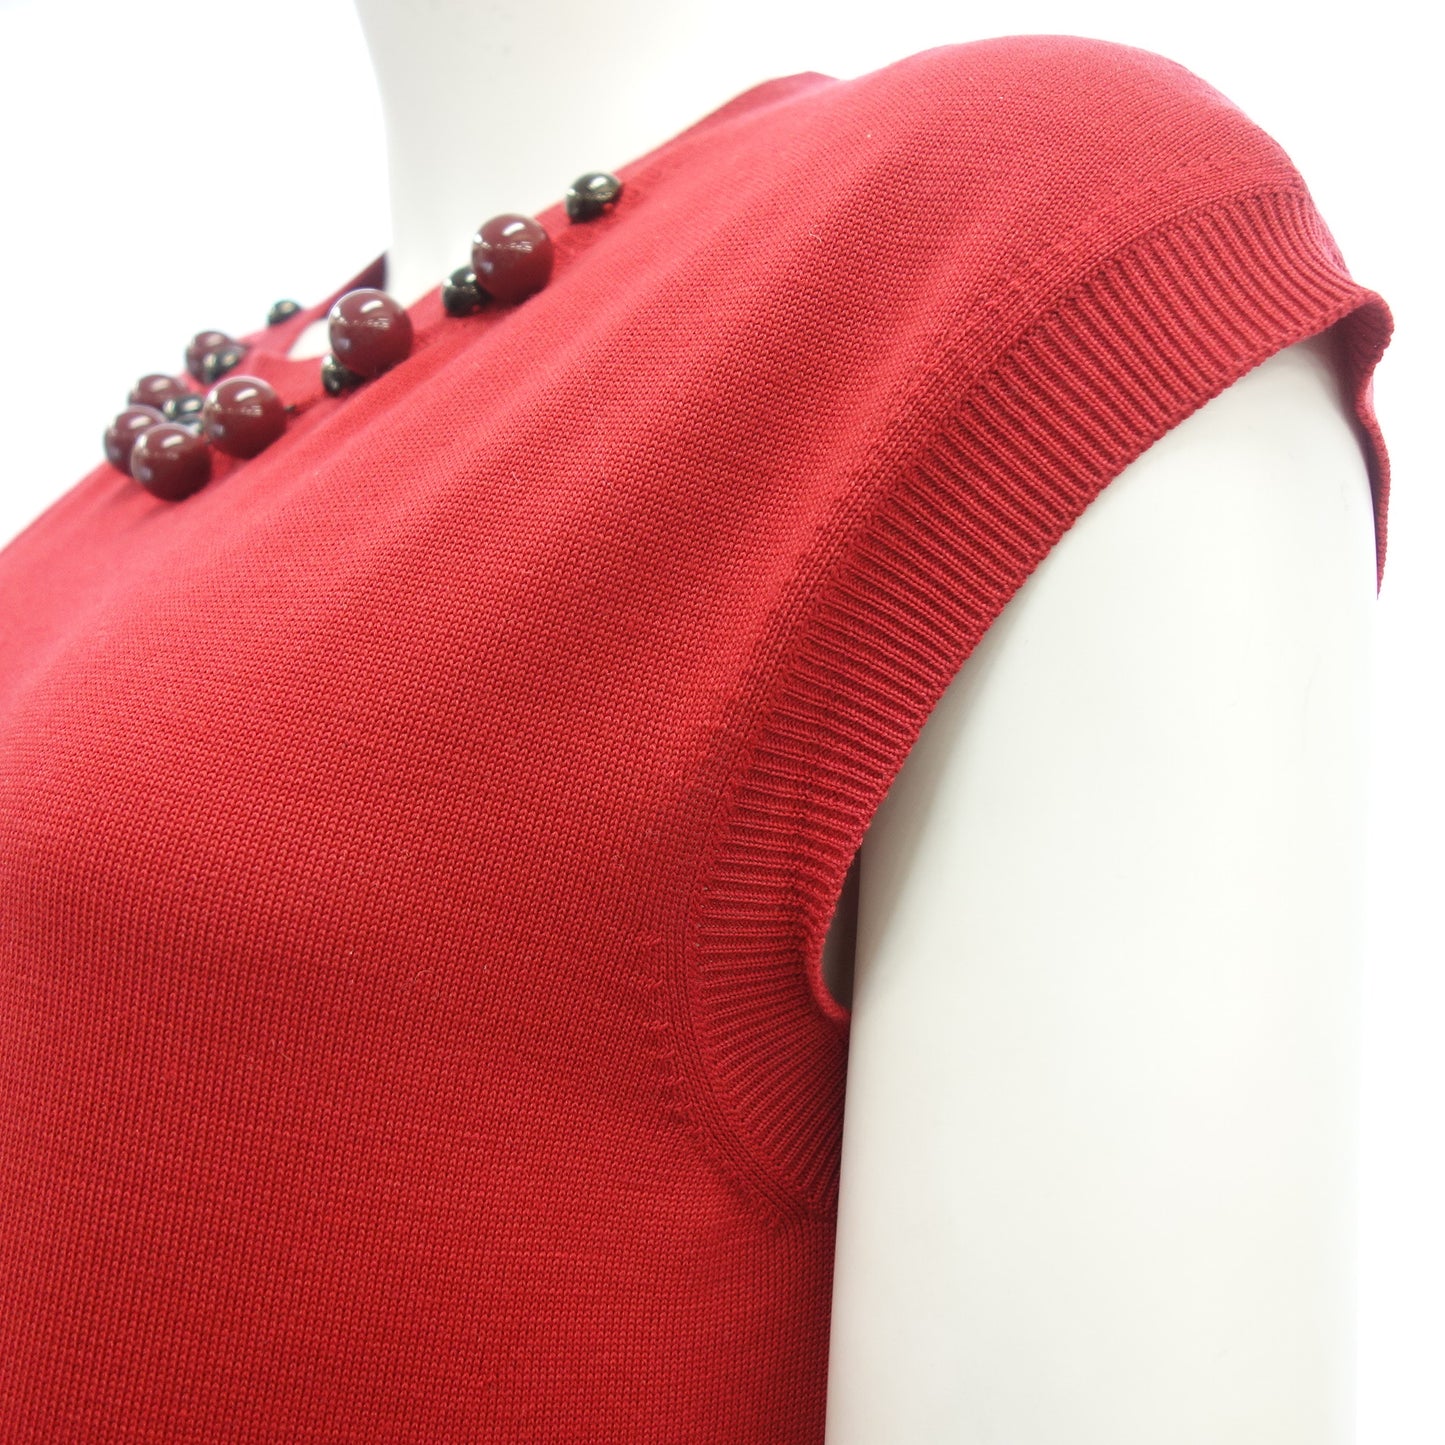 LOUIS VUITTON Knit Dress Beads Women's Red M LOUIS VUITTON [AFB36] [Used] 